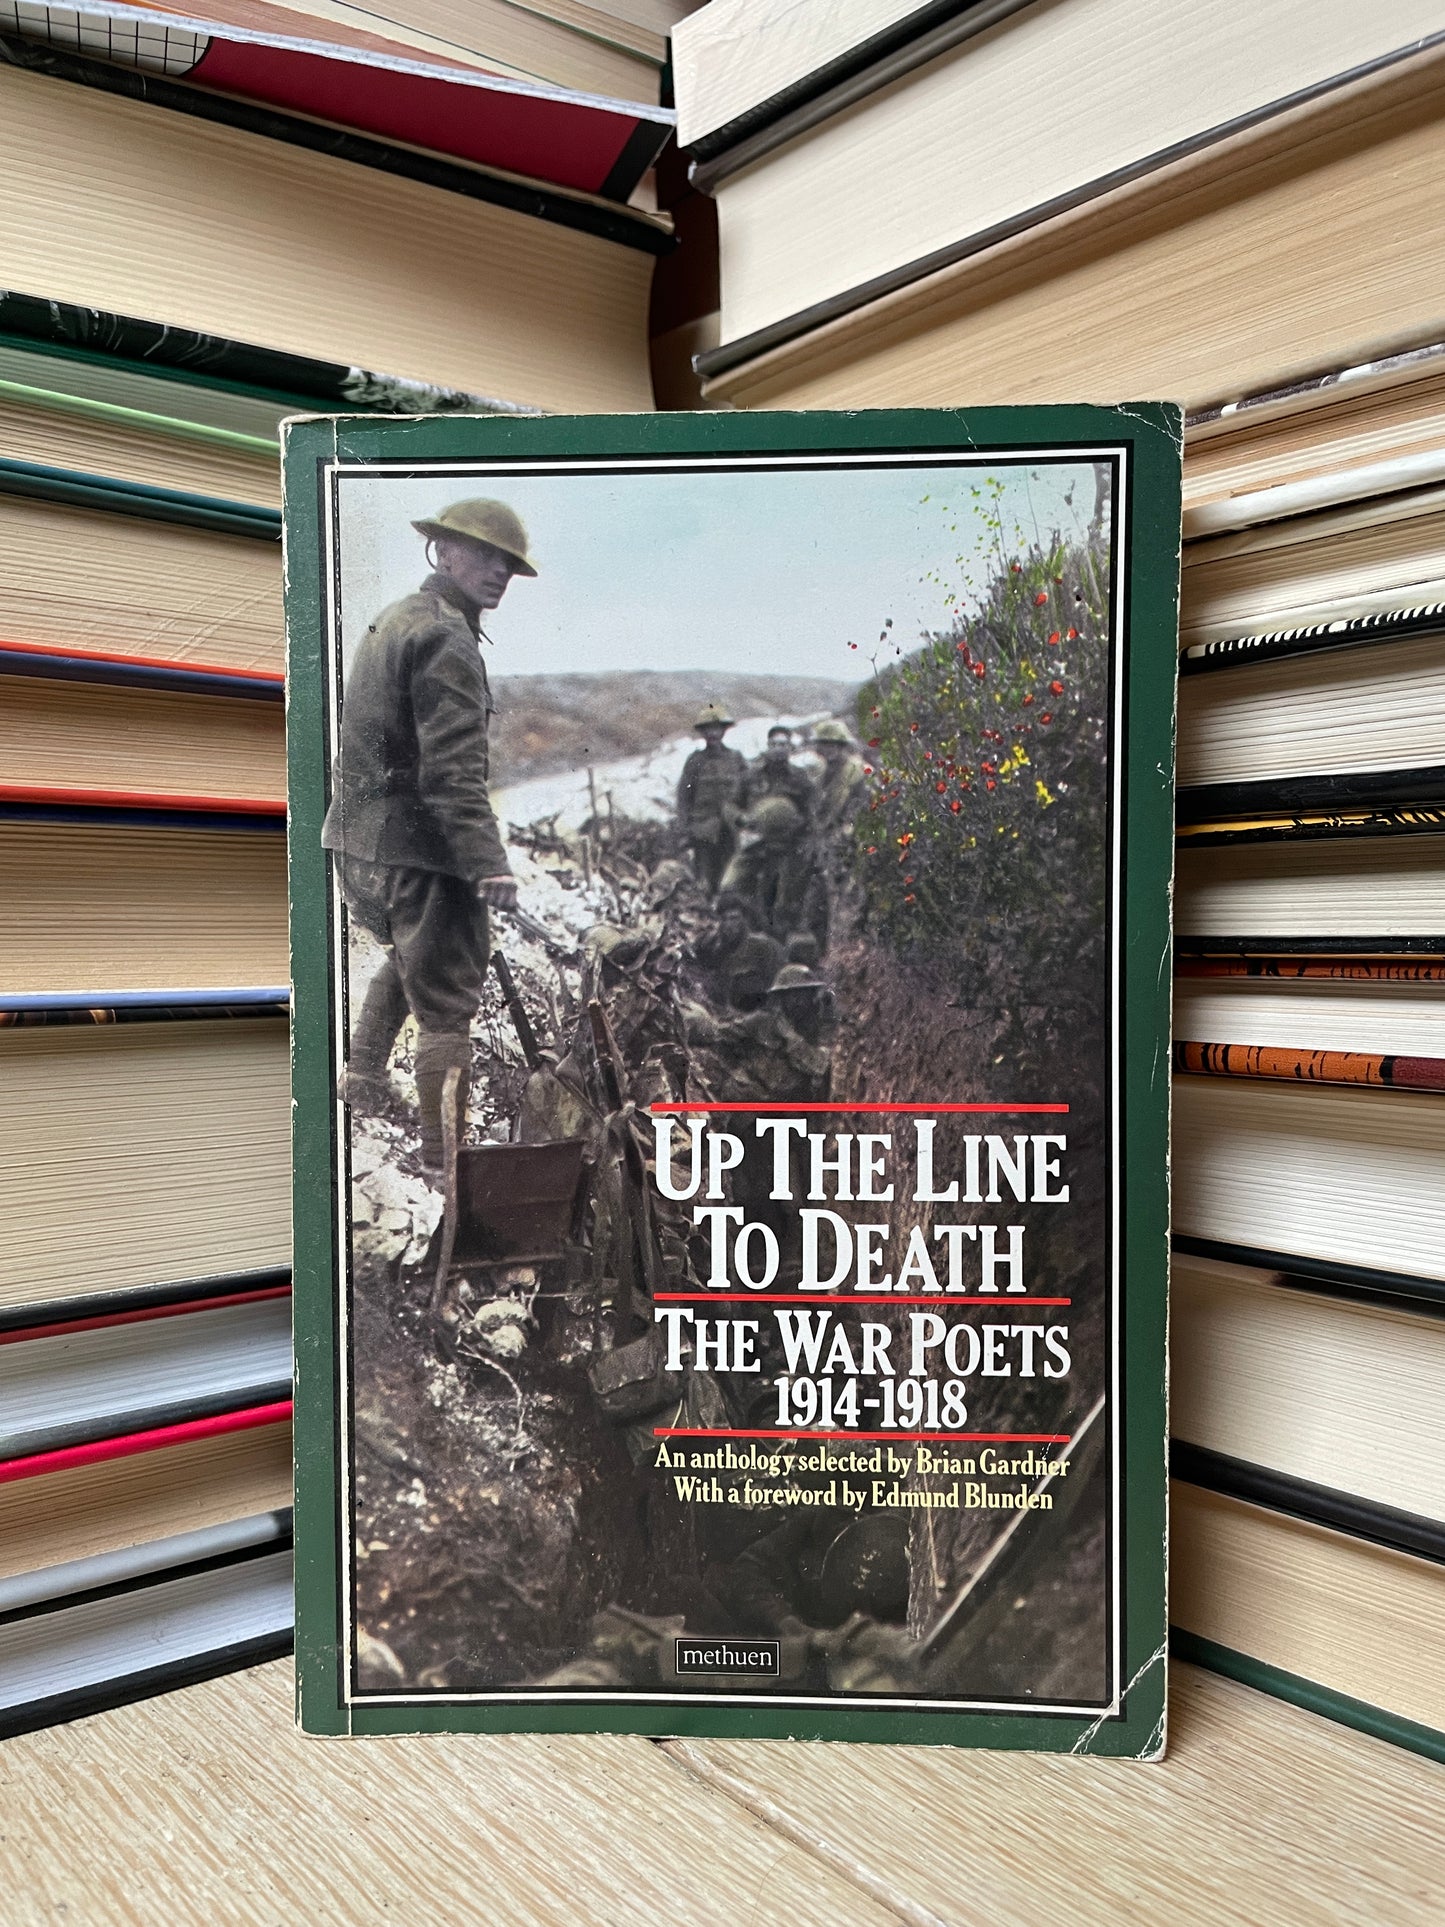 The War Poets - Up the Line to Death